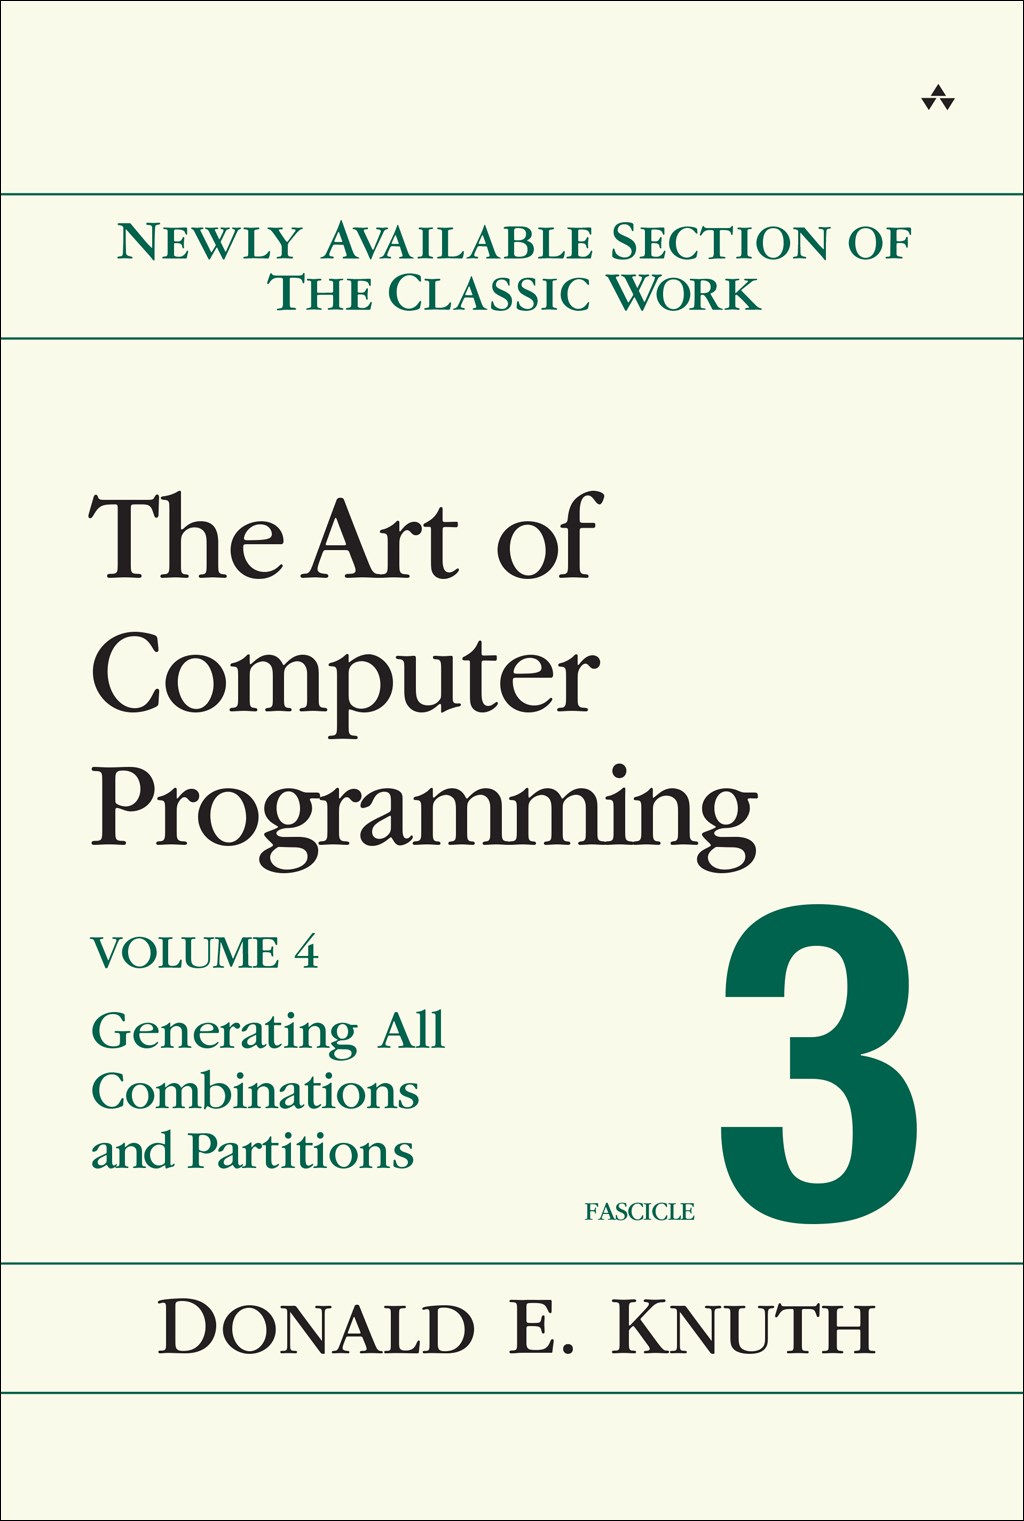 Art of Computer Programming, Volume 4, Fascicle 3, The: Generating All Combinations and Partitions